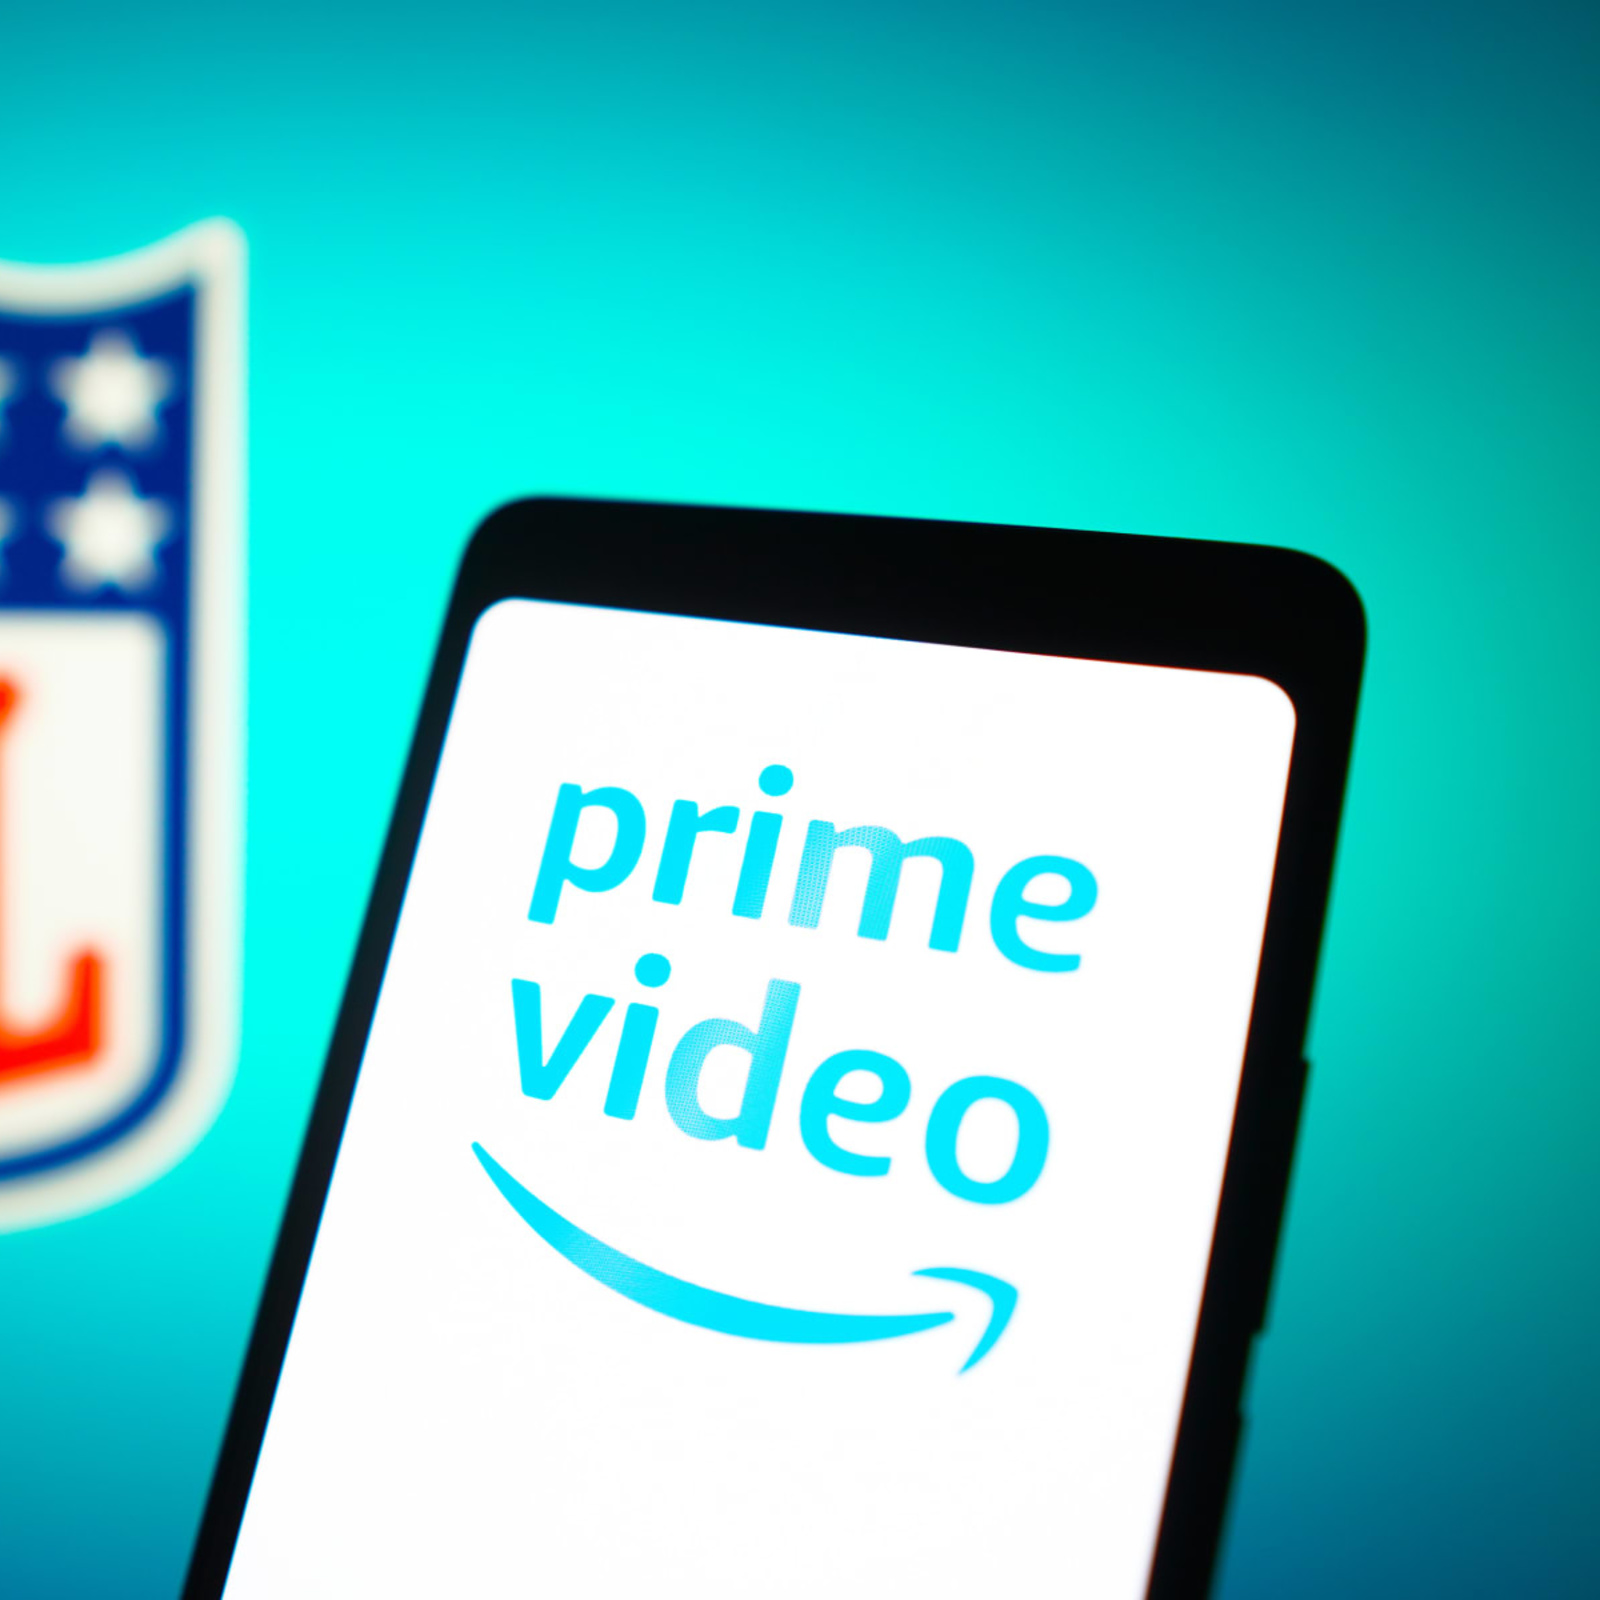 s Prime Video to stream its first NFL playoff game next season, Wall  Street Journal reports